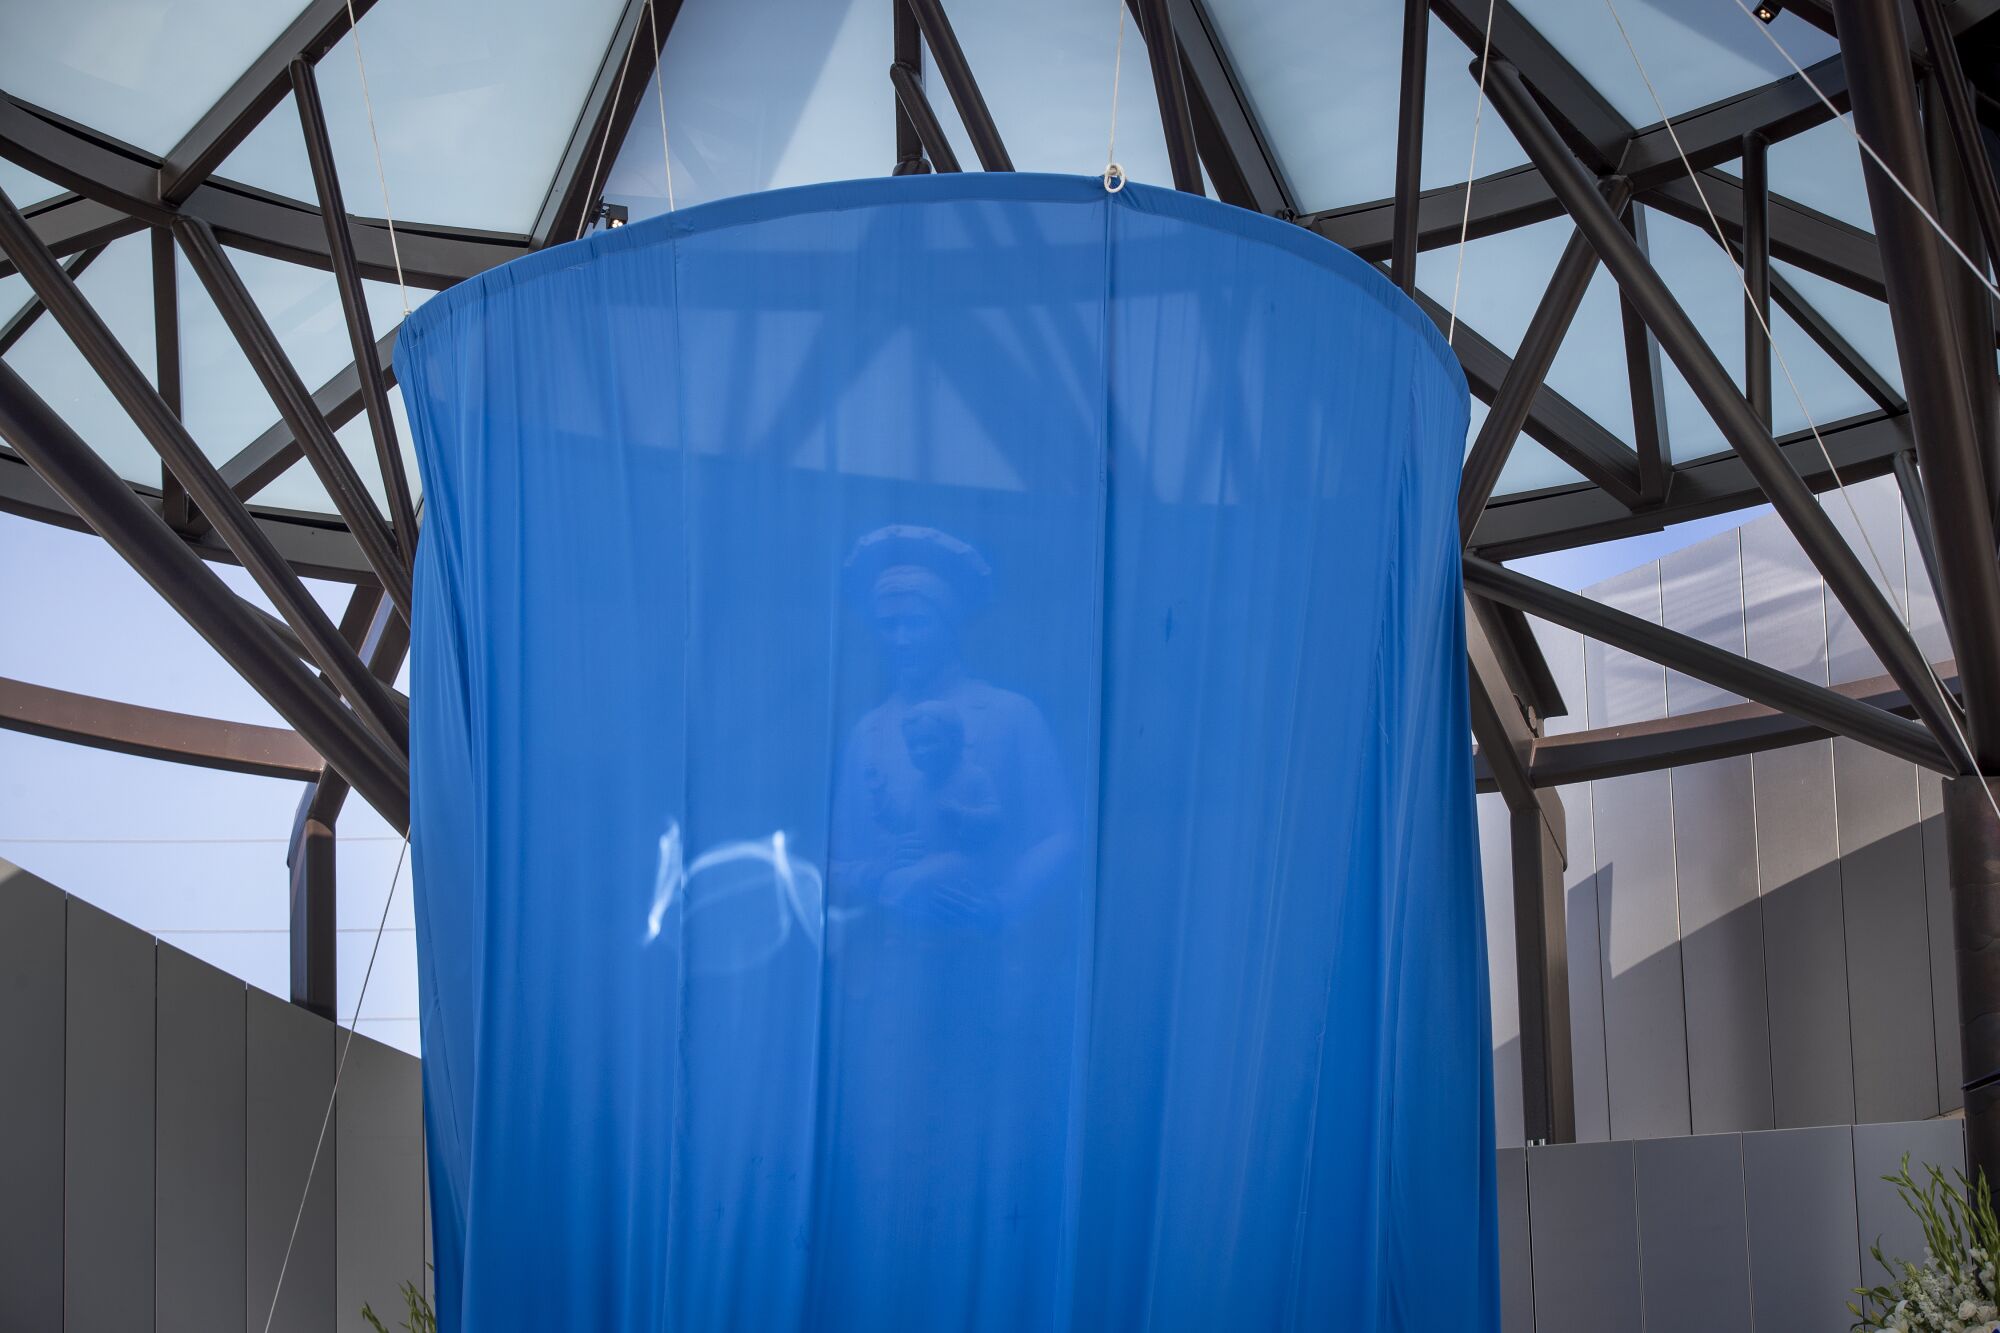 Our Lady of La Vang is seen behind a curtain prior to the unveiling.